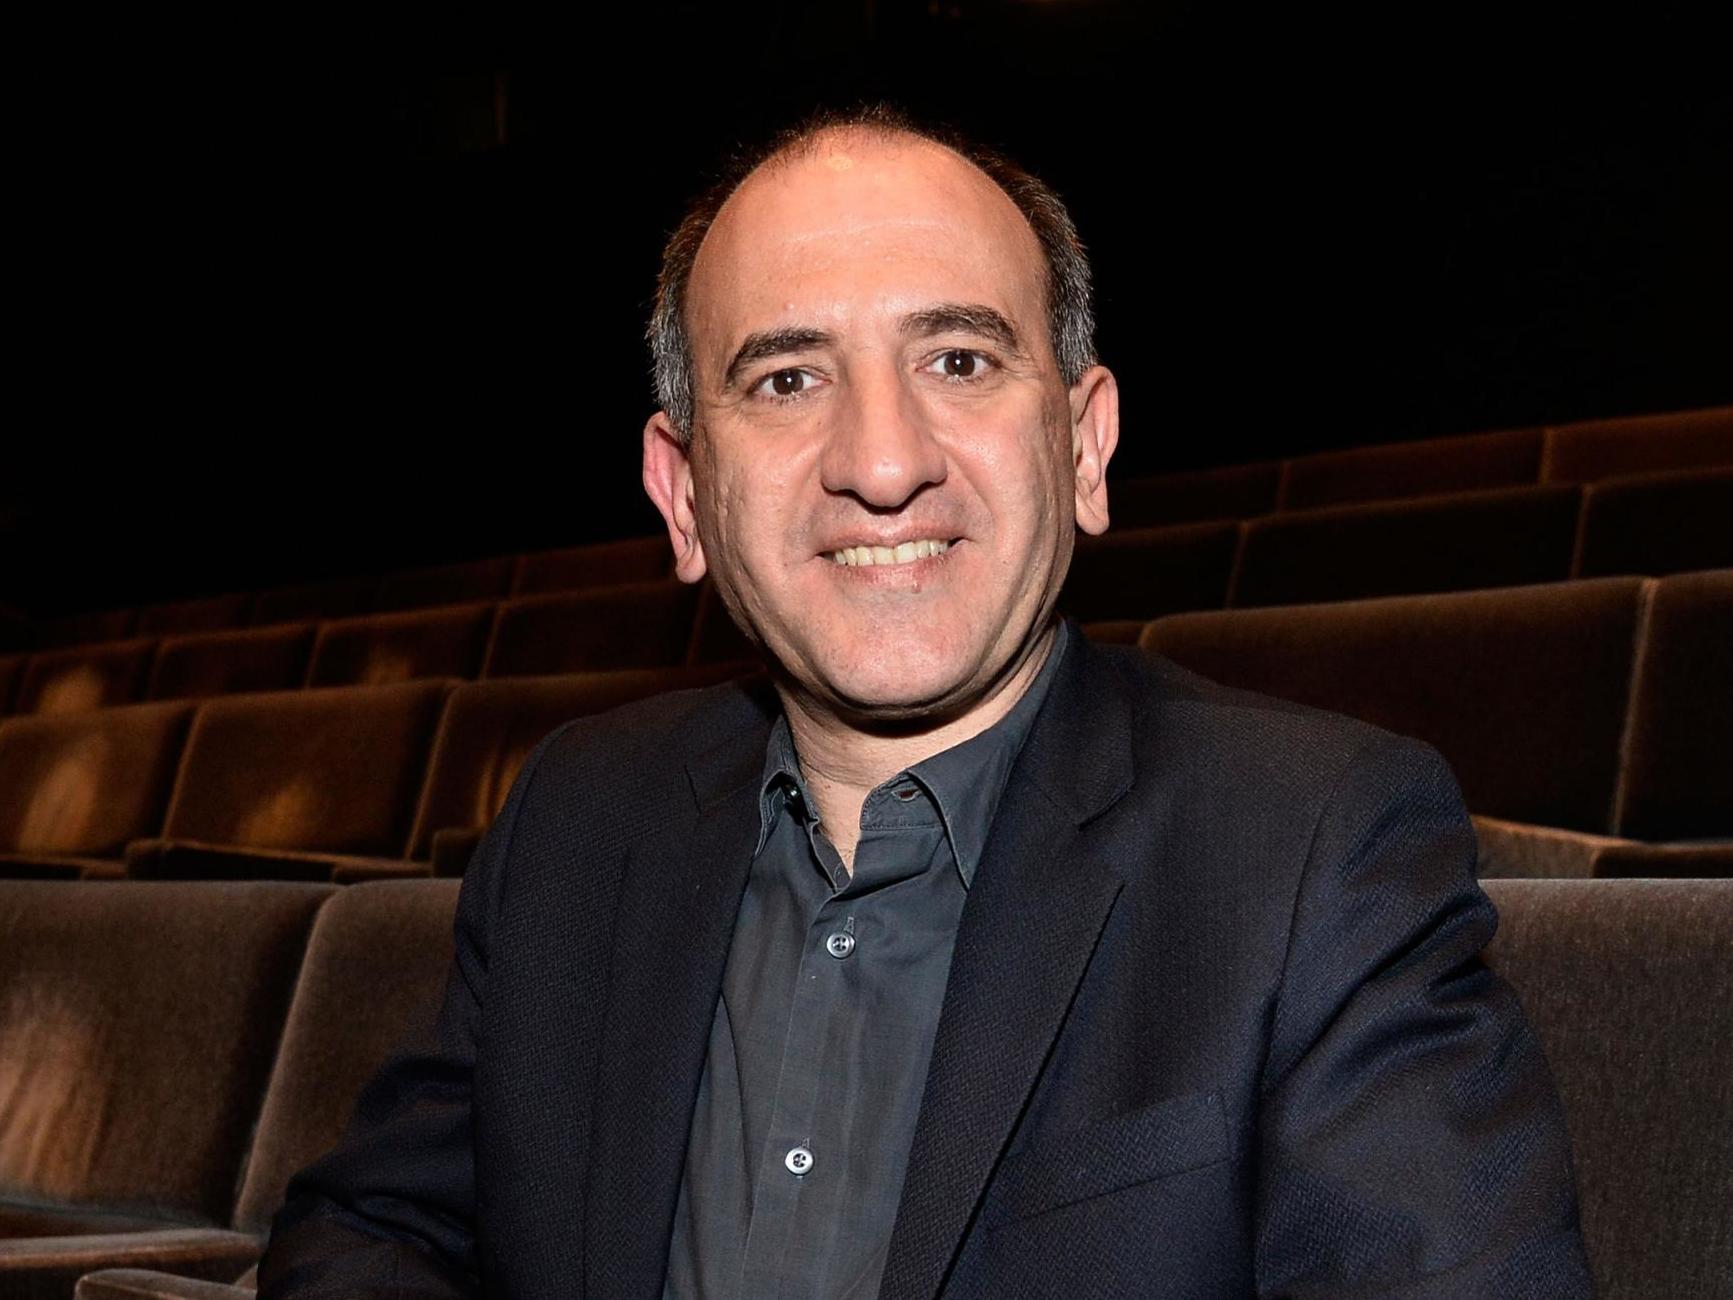 Armando Iannucci?wanted the show to be the ‘funniest thing on TV’